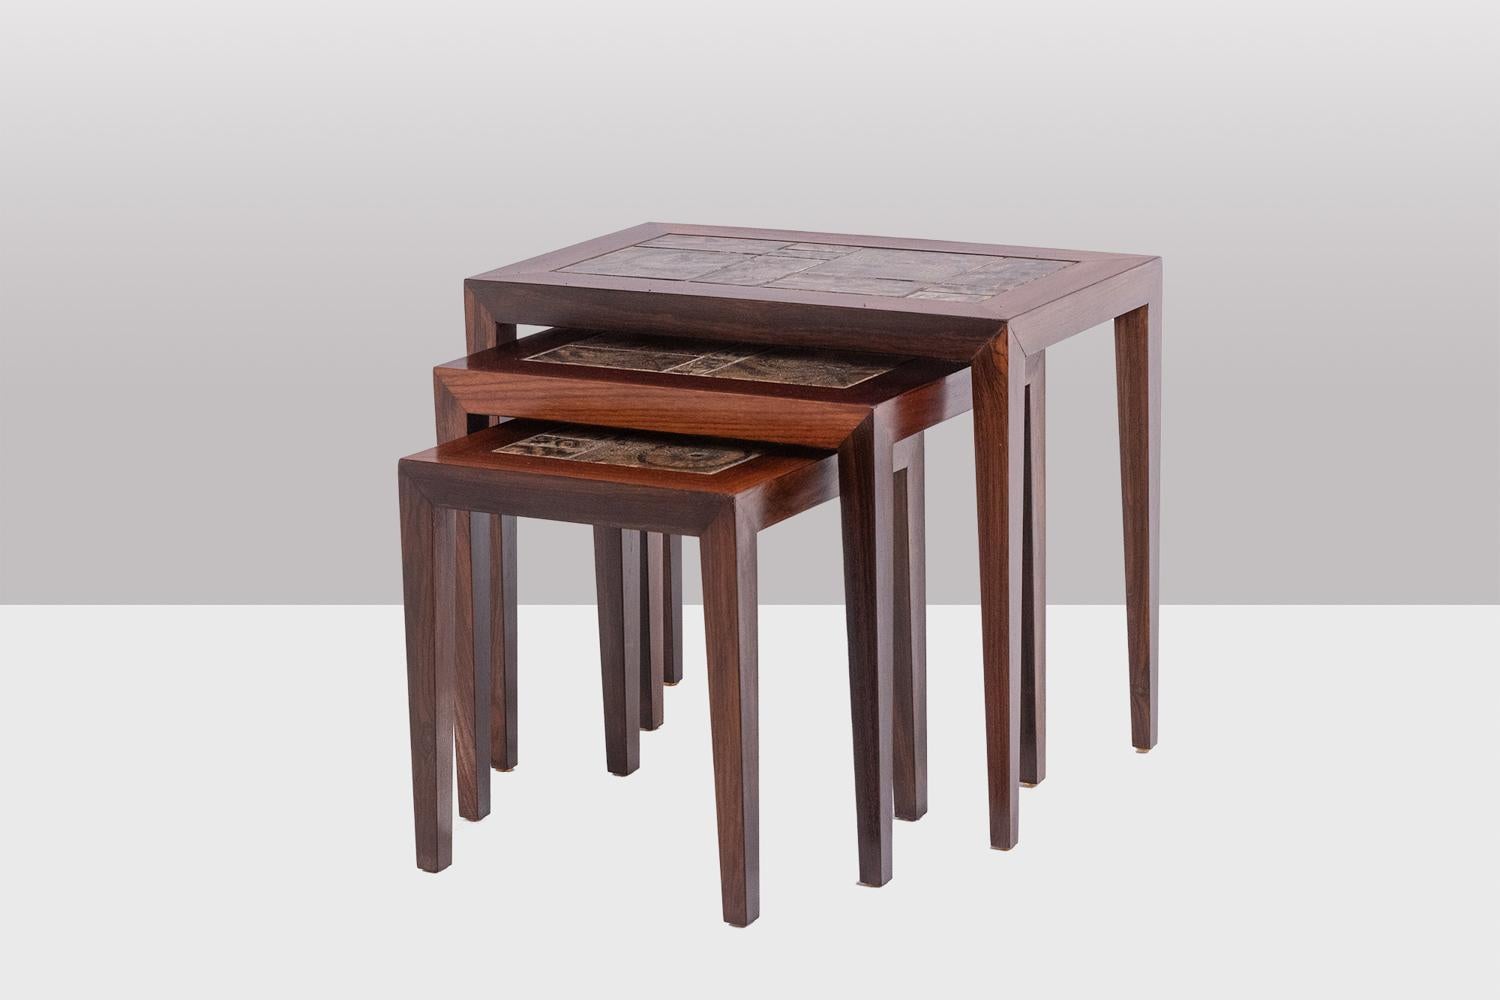 Royal Copenhagen Denmark, stamped.

Set of 3 rectangular “nesting” tables, with its Baca pattern ceramic top and its rosewood base.

Danish work realized in the 1970s.

Dimensions:

Large: H 50.5 x L 58 x D 35.5 cm
Medium: H 45 x L 46.5 x D 35